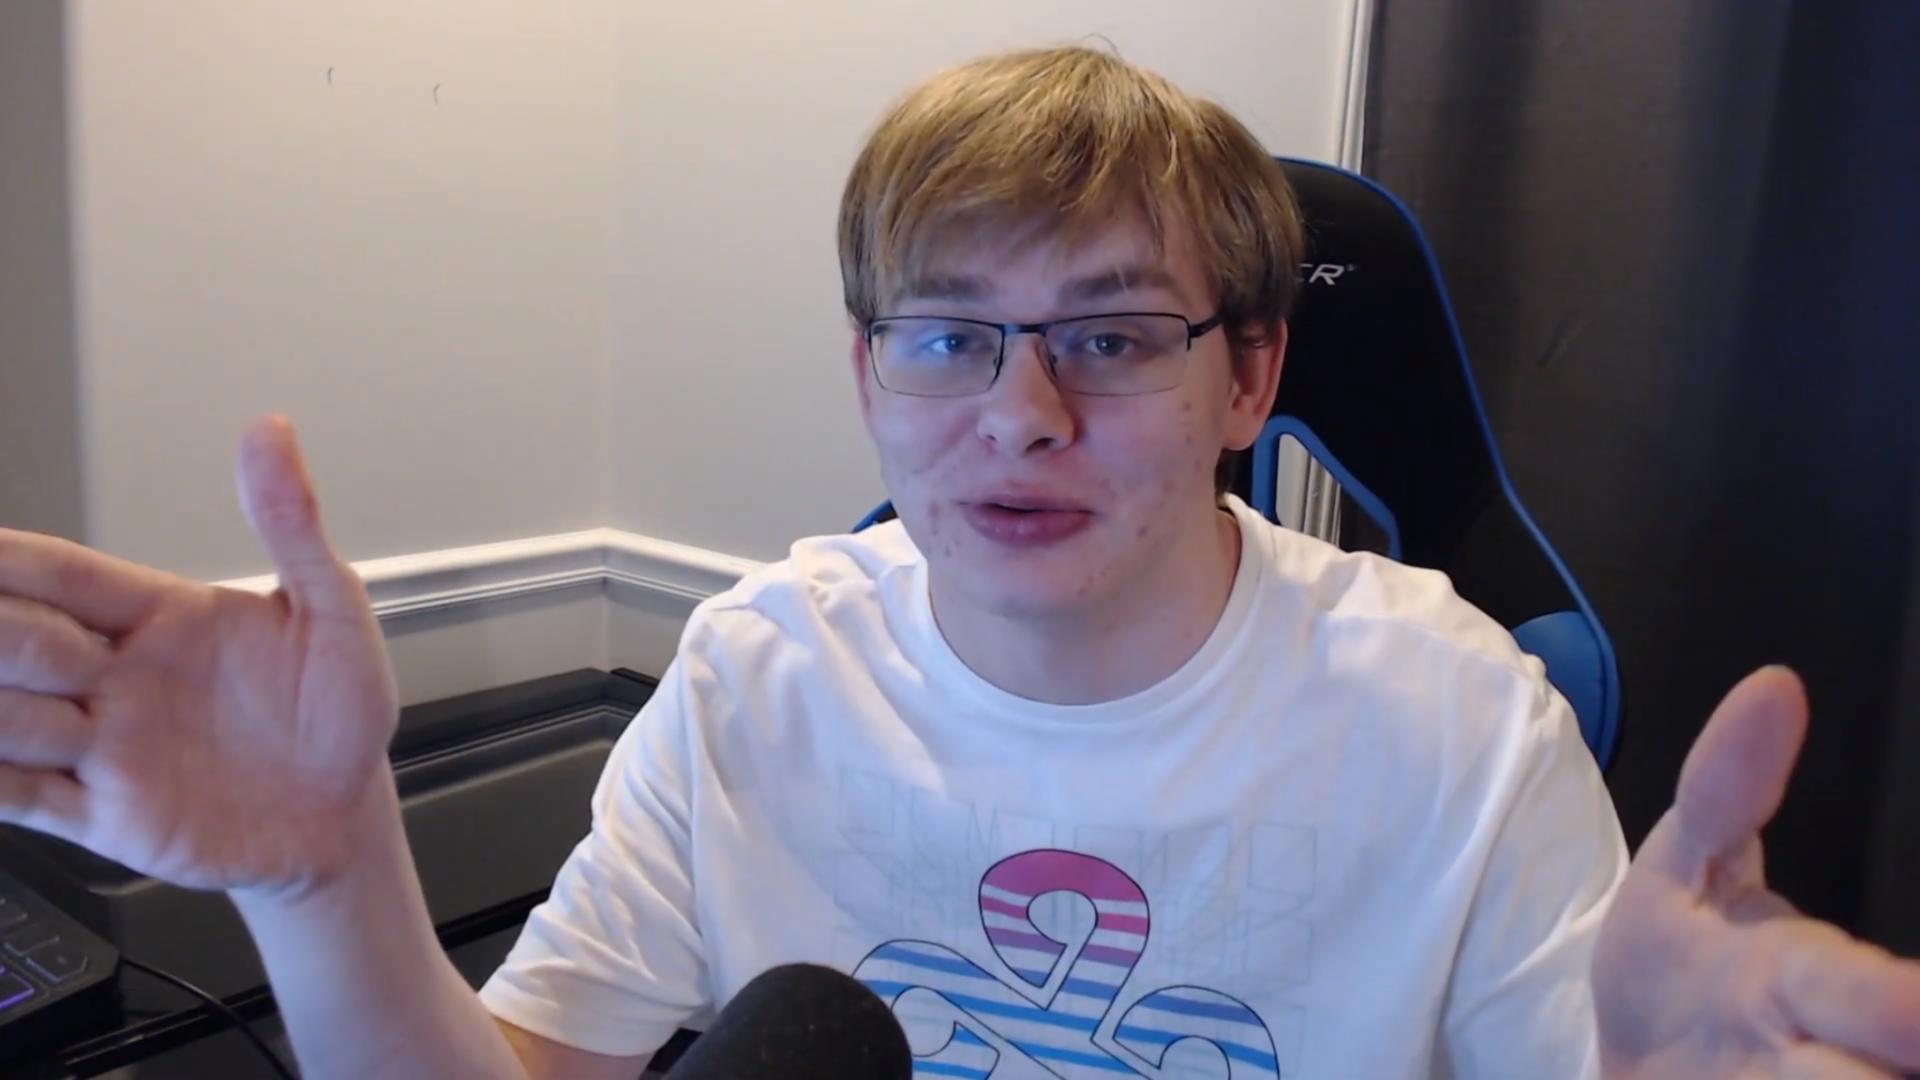 CallMeCarson has been accused of grooming several underage YouTube fans.